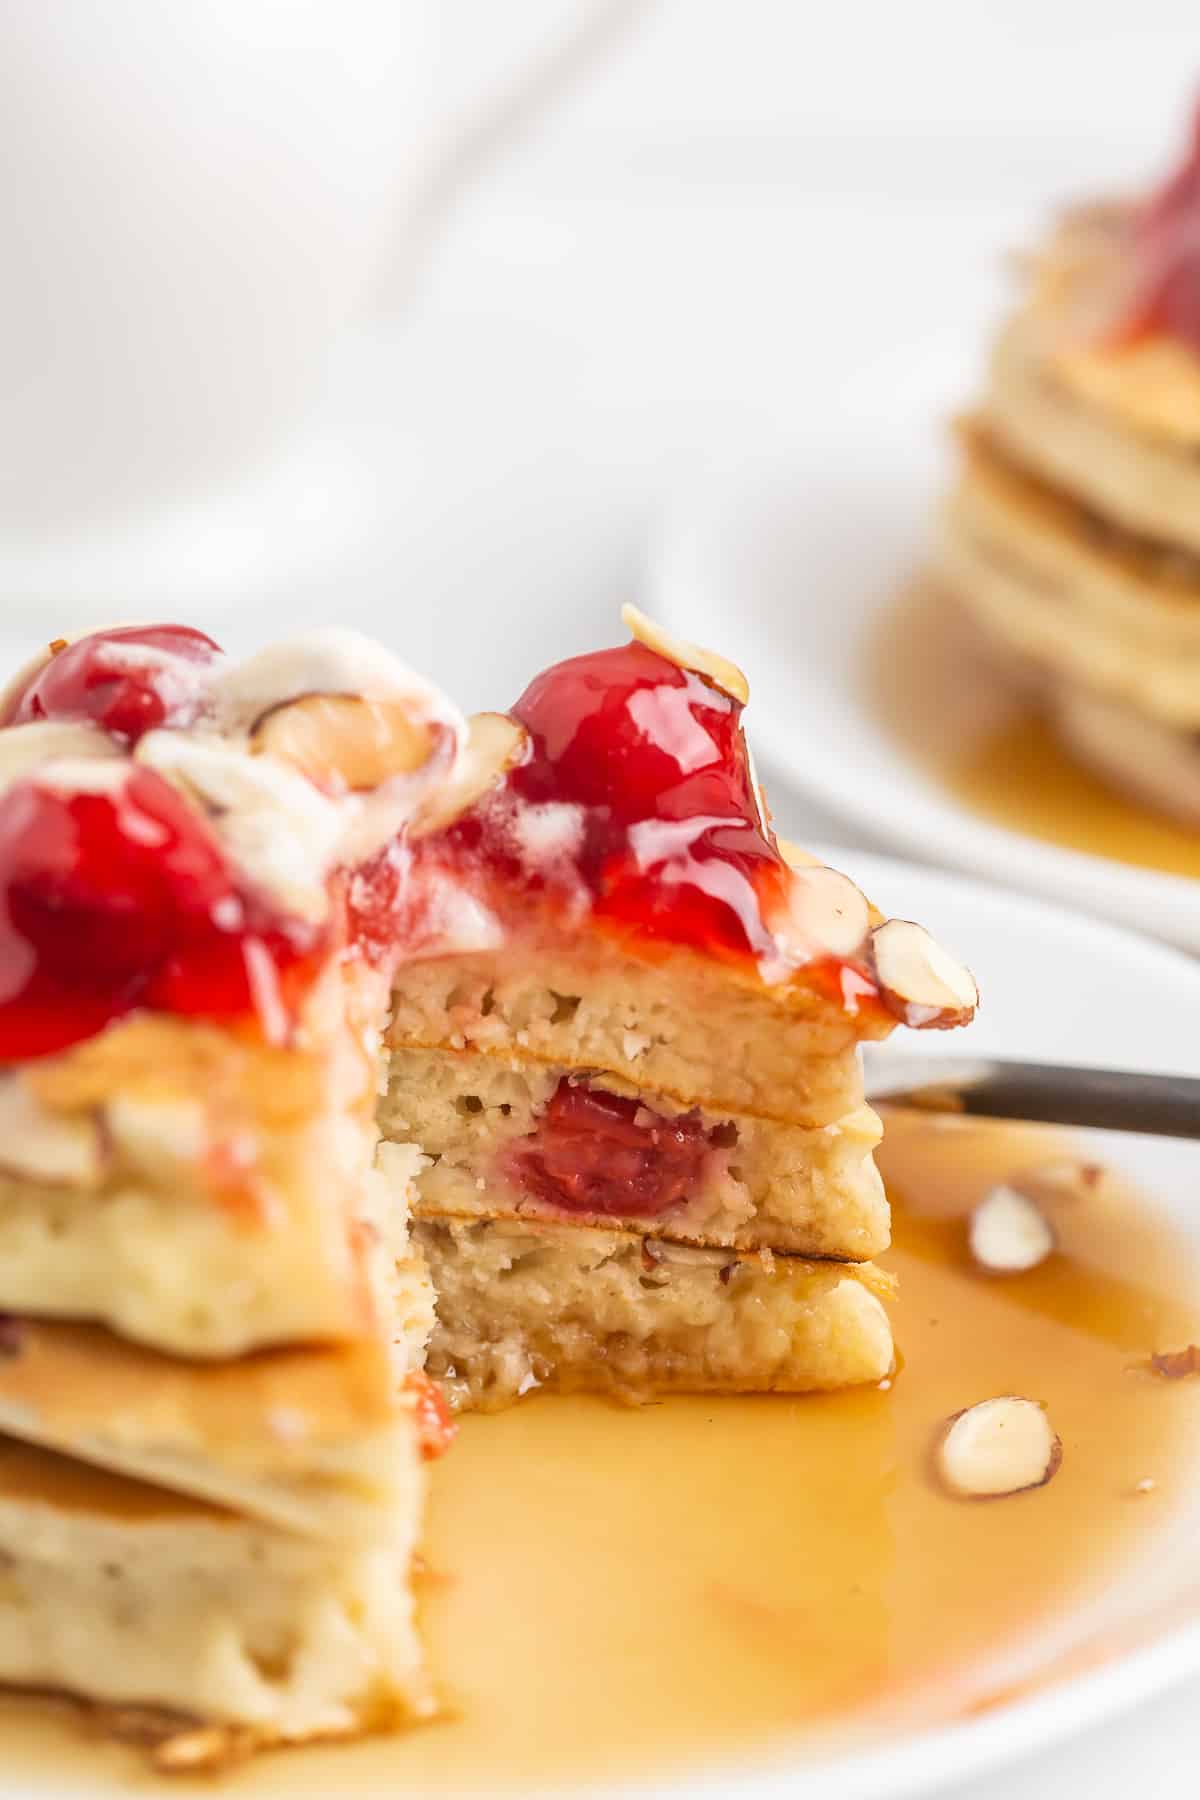 Pancakes with cherries and almonds, a stack of three.